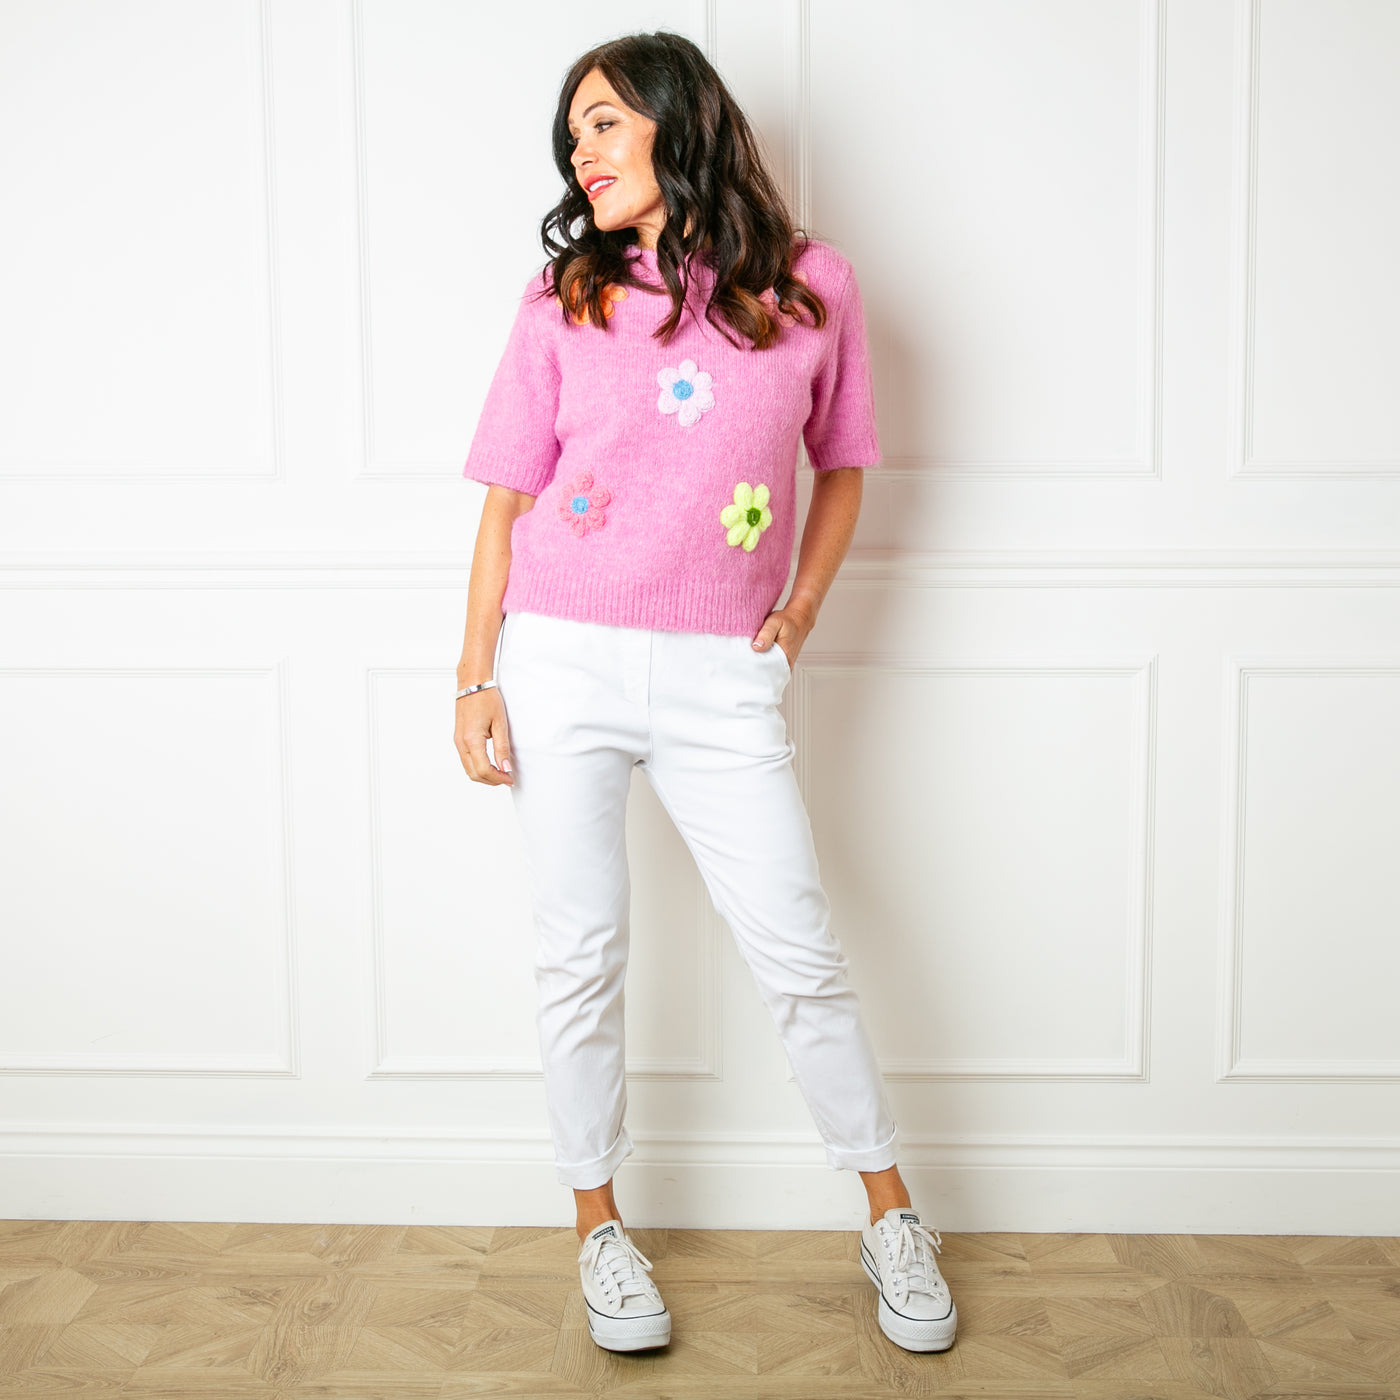 The baby pink Short Sleeve Daisy Jumper with knitted flowers across the front 